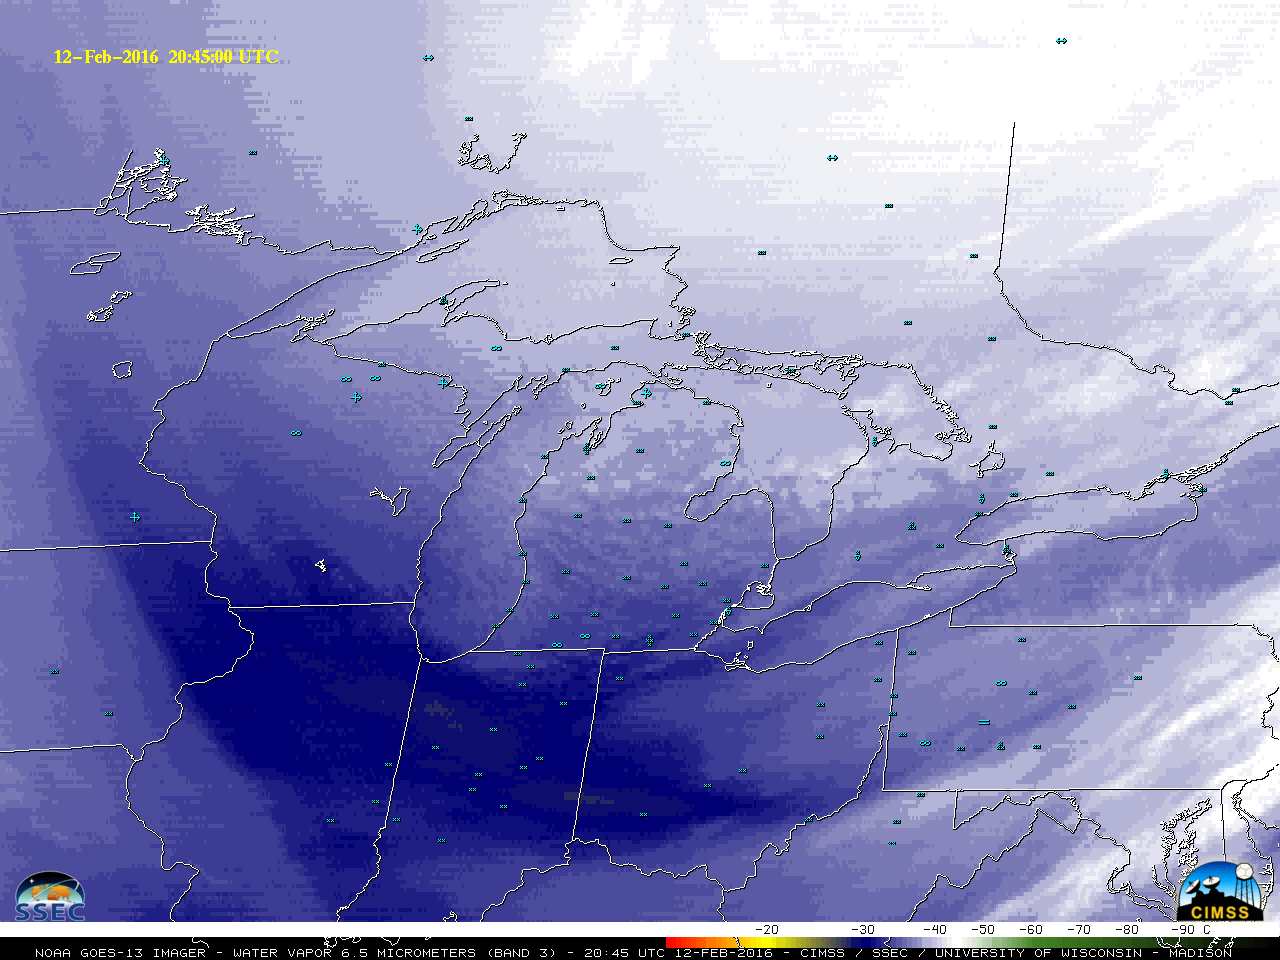 GOES-13 Water Vapor (6.5 µm) images [click to play animation]